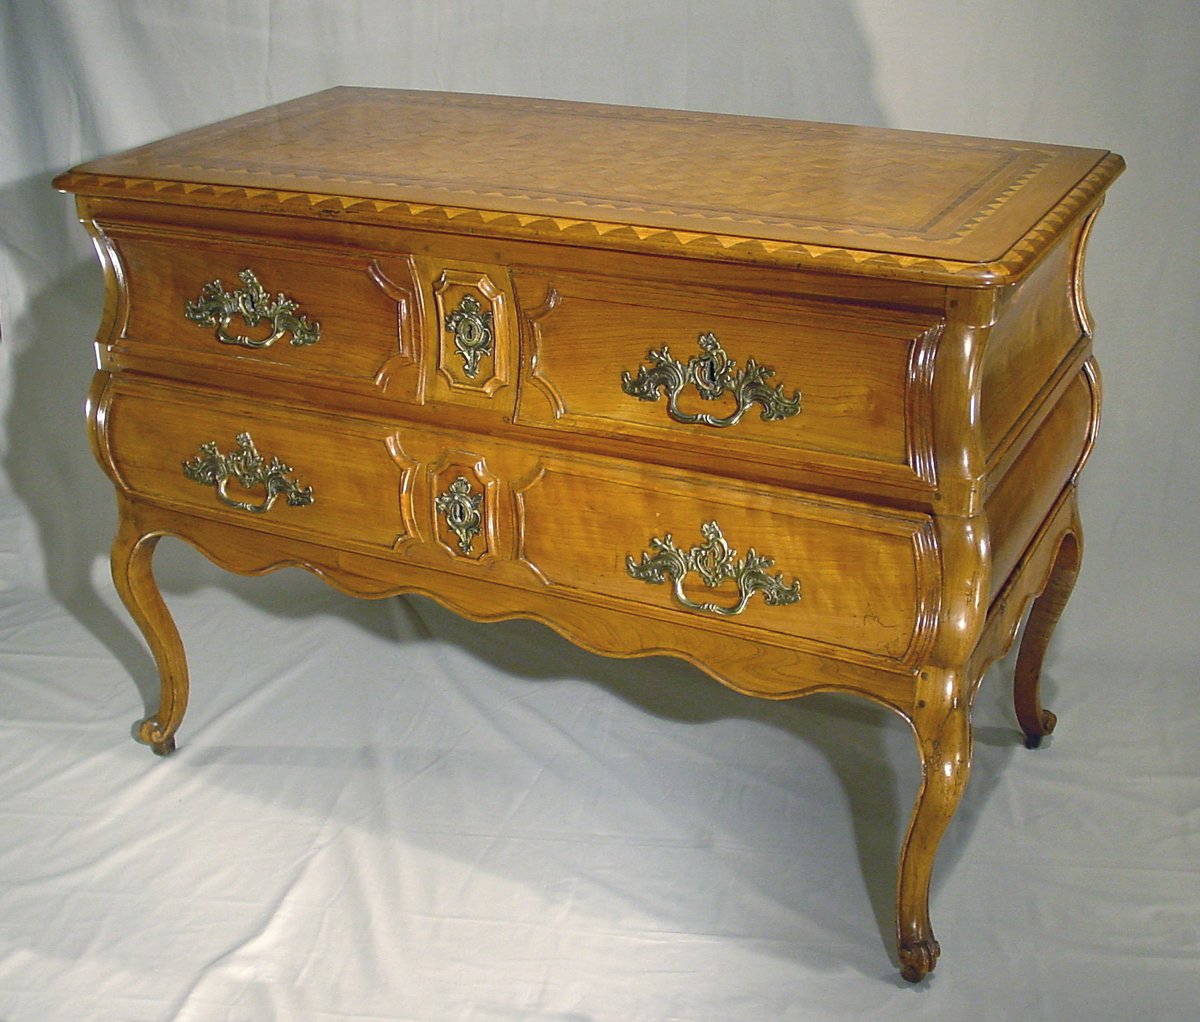 A Rare Louis XV Bois Clair & Parquetry Commode Attributed to Jean Francois Hache